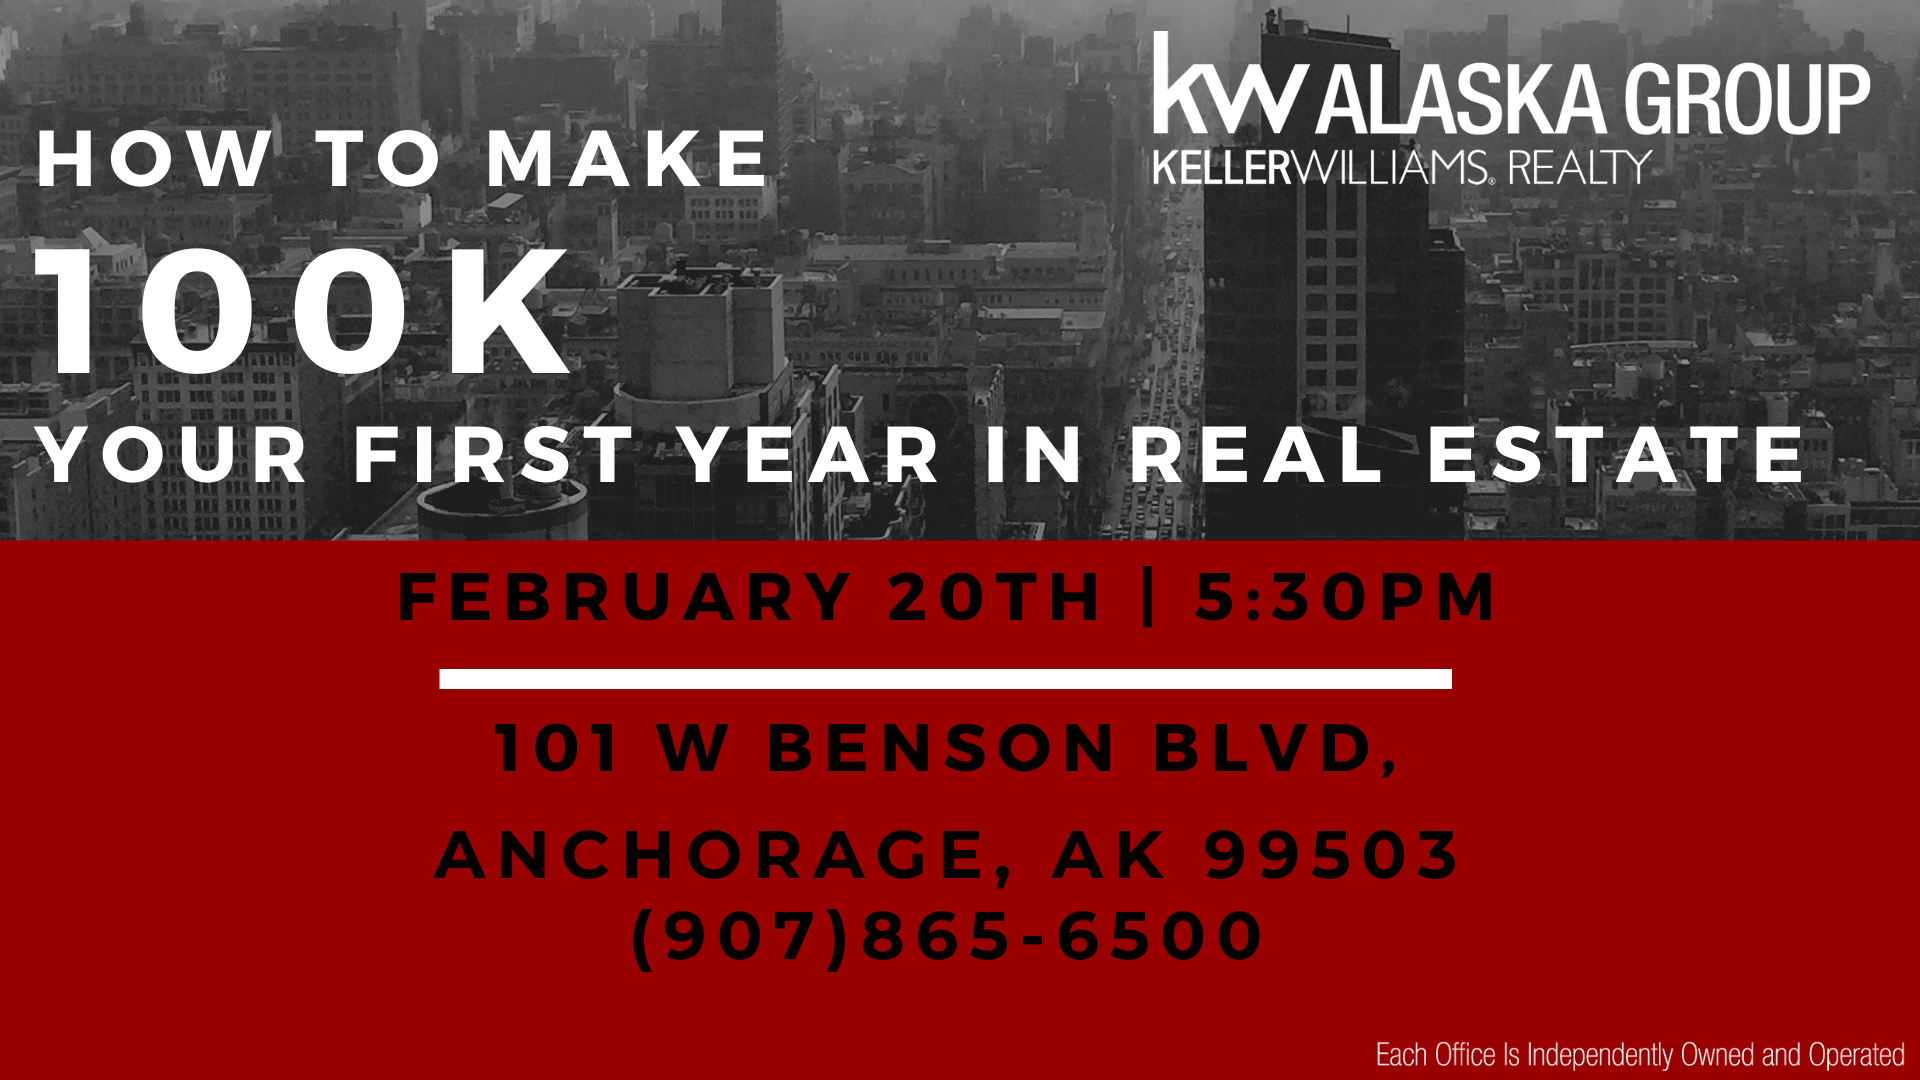 How to Make 100k Your First Year in Real Estate!